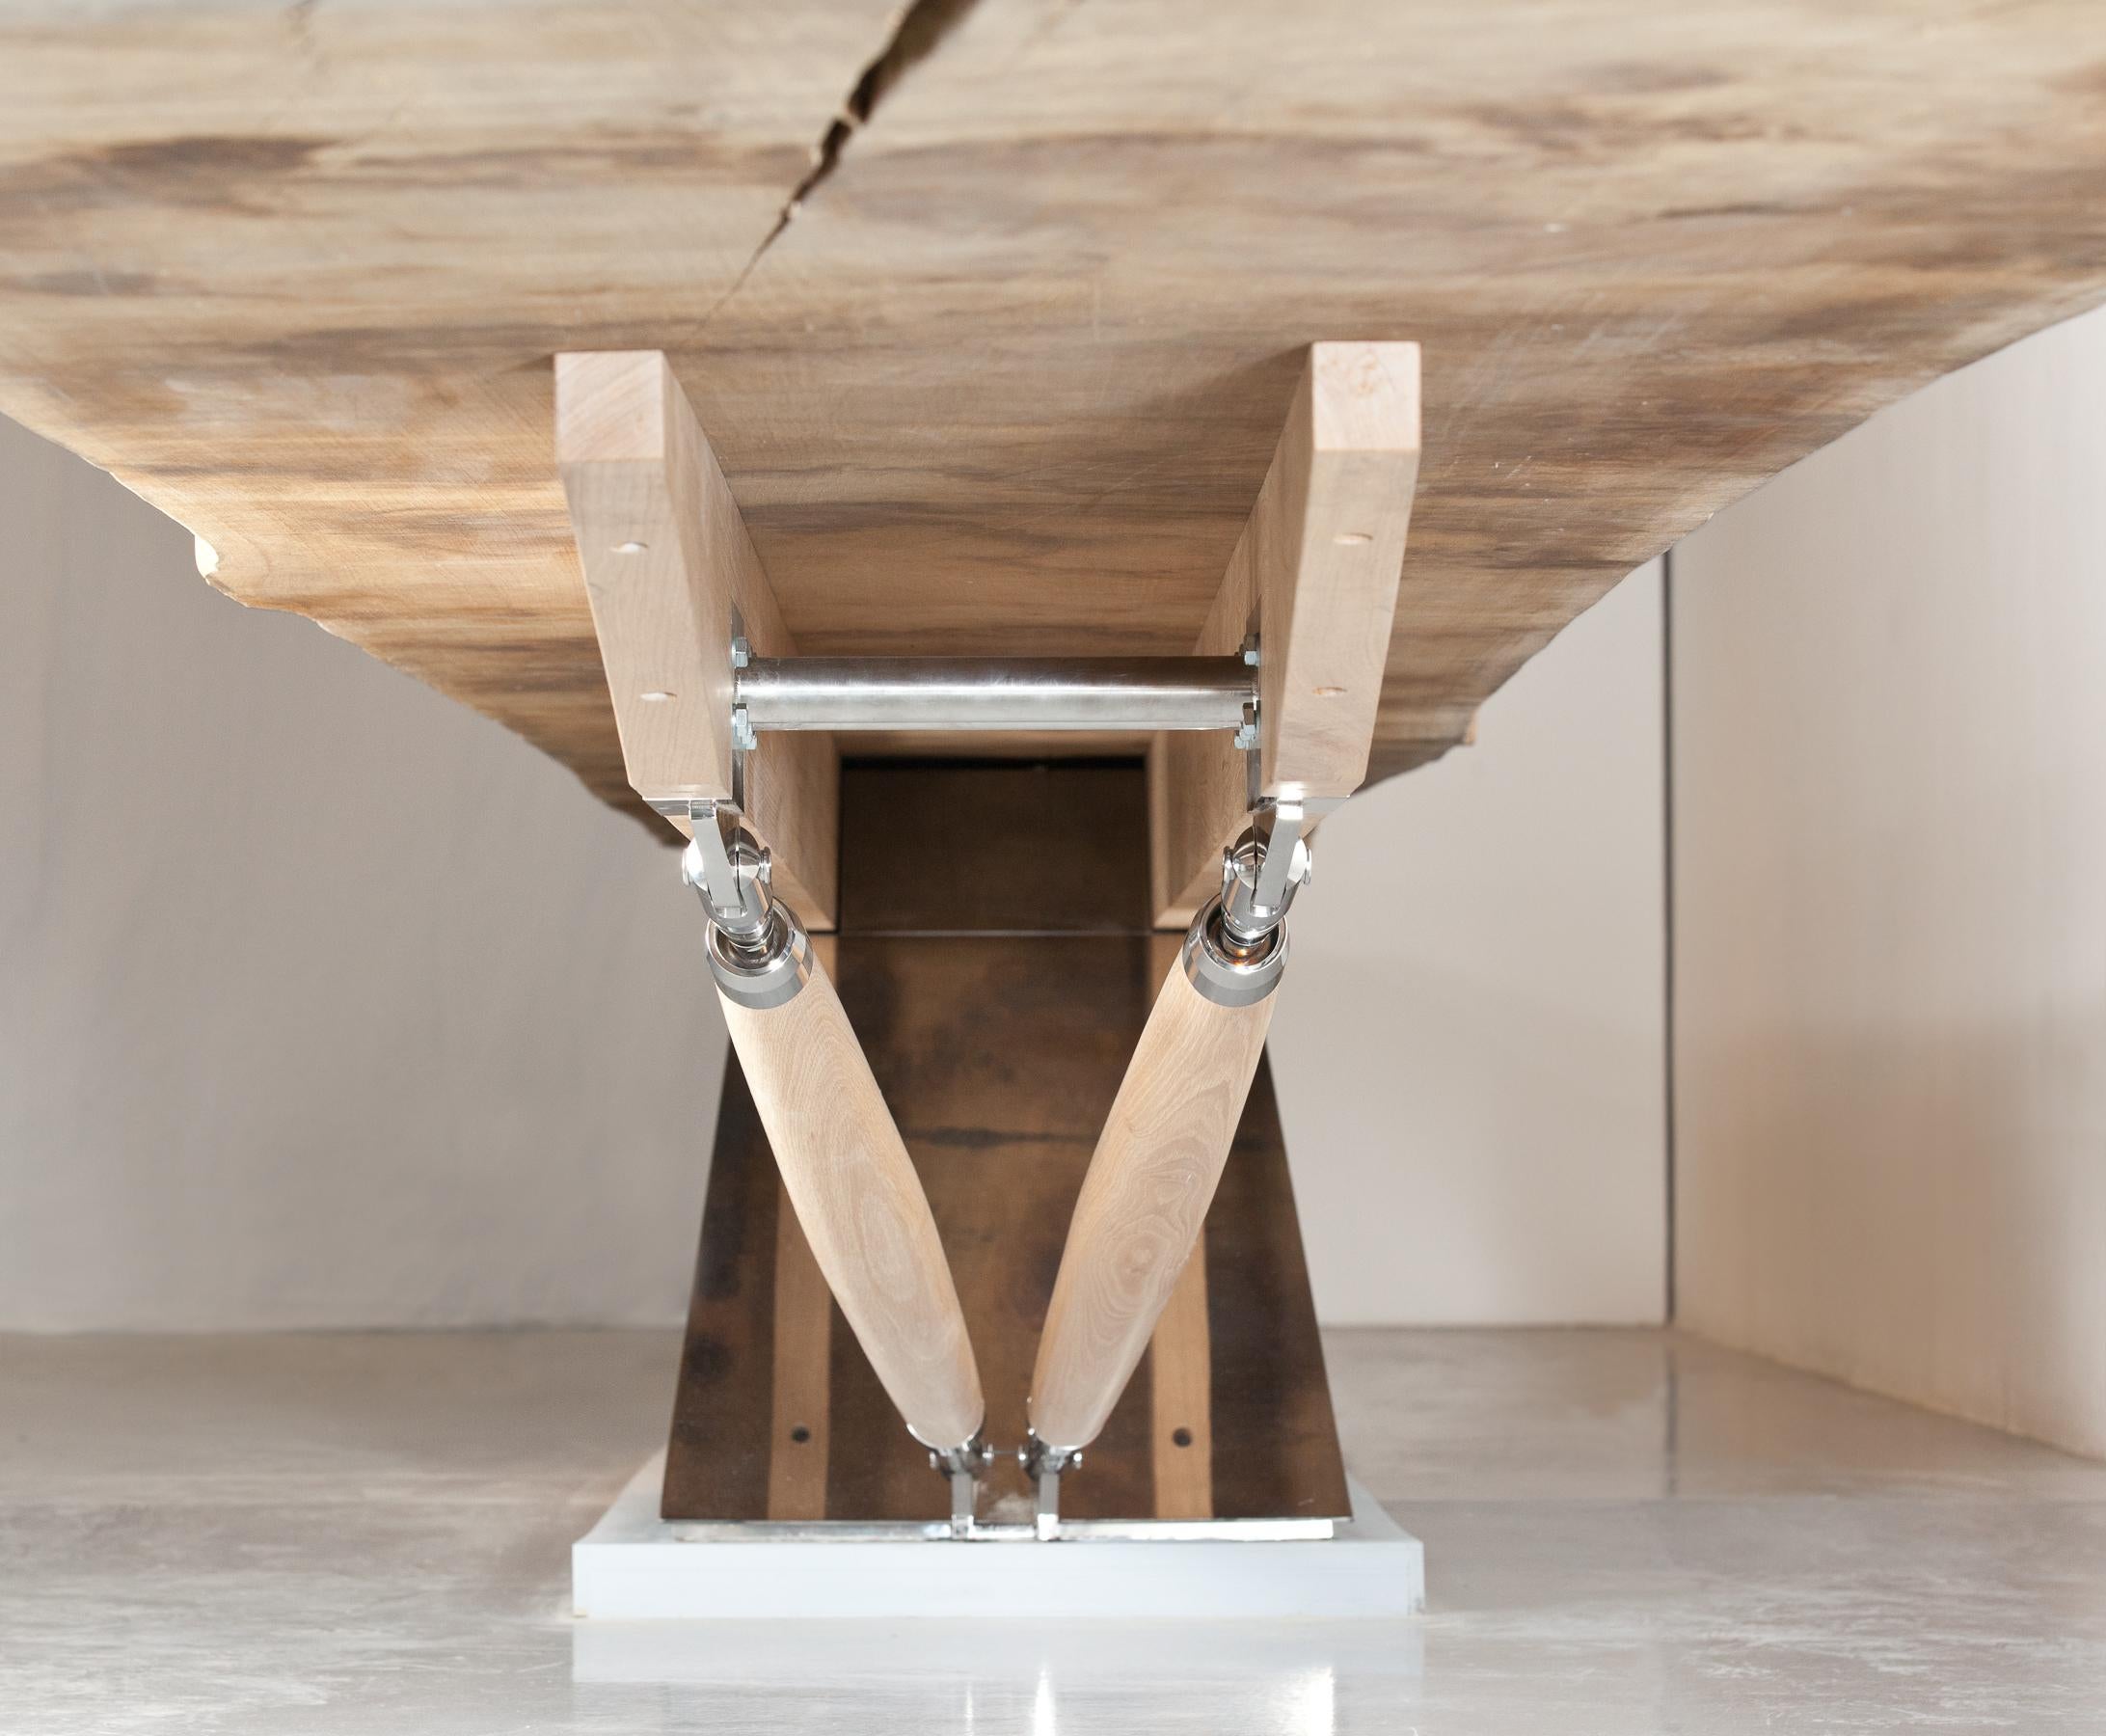 The ‘Tree’ table is an astonishing 38 feet (11.5m) long and made from a single plank of European oak ‘balanced’ on a mirror polished stainless steel pyramid. 

Made by renowned English furniture maker, Benchmark, the design is derived from the